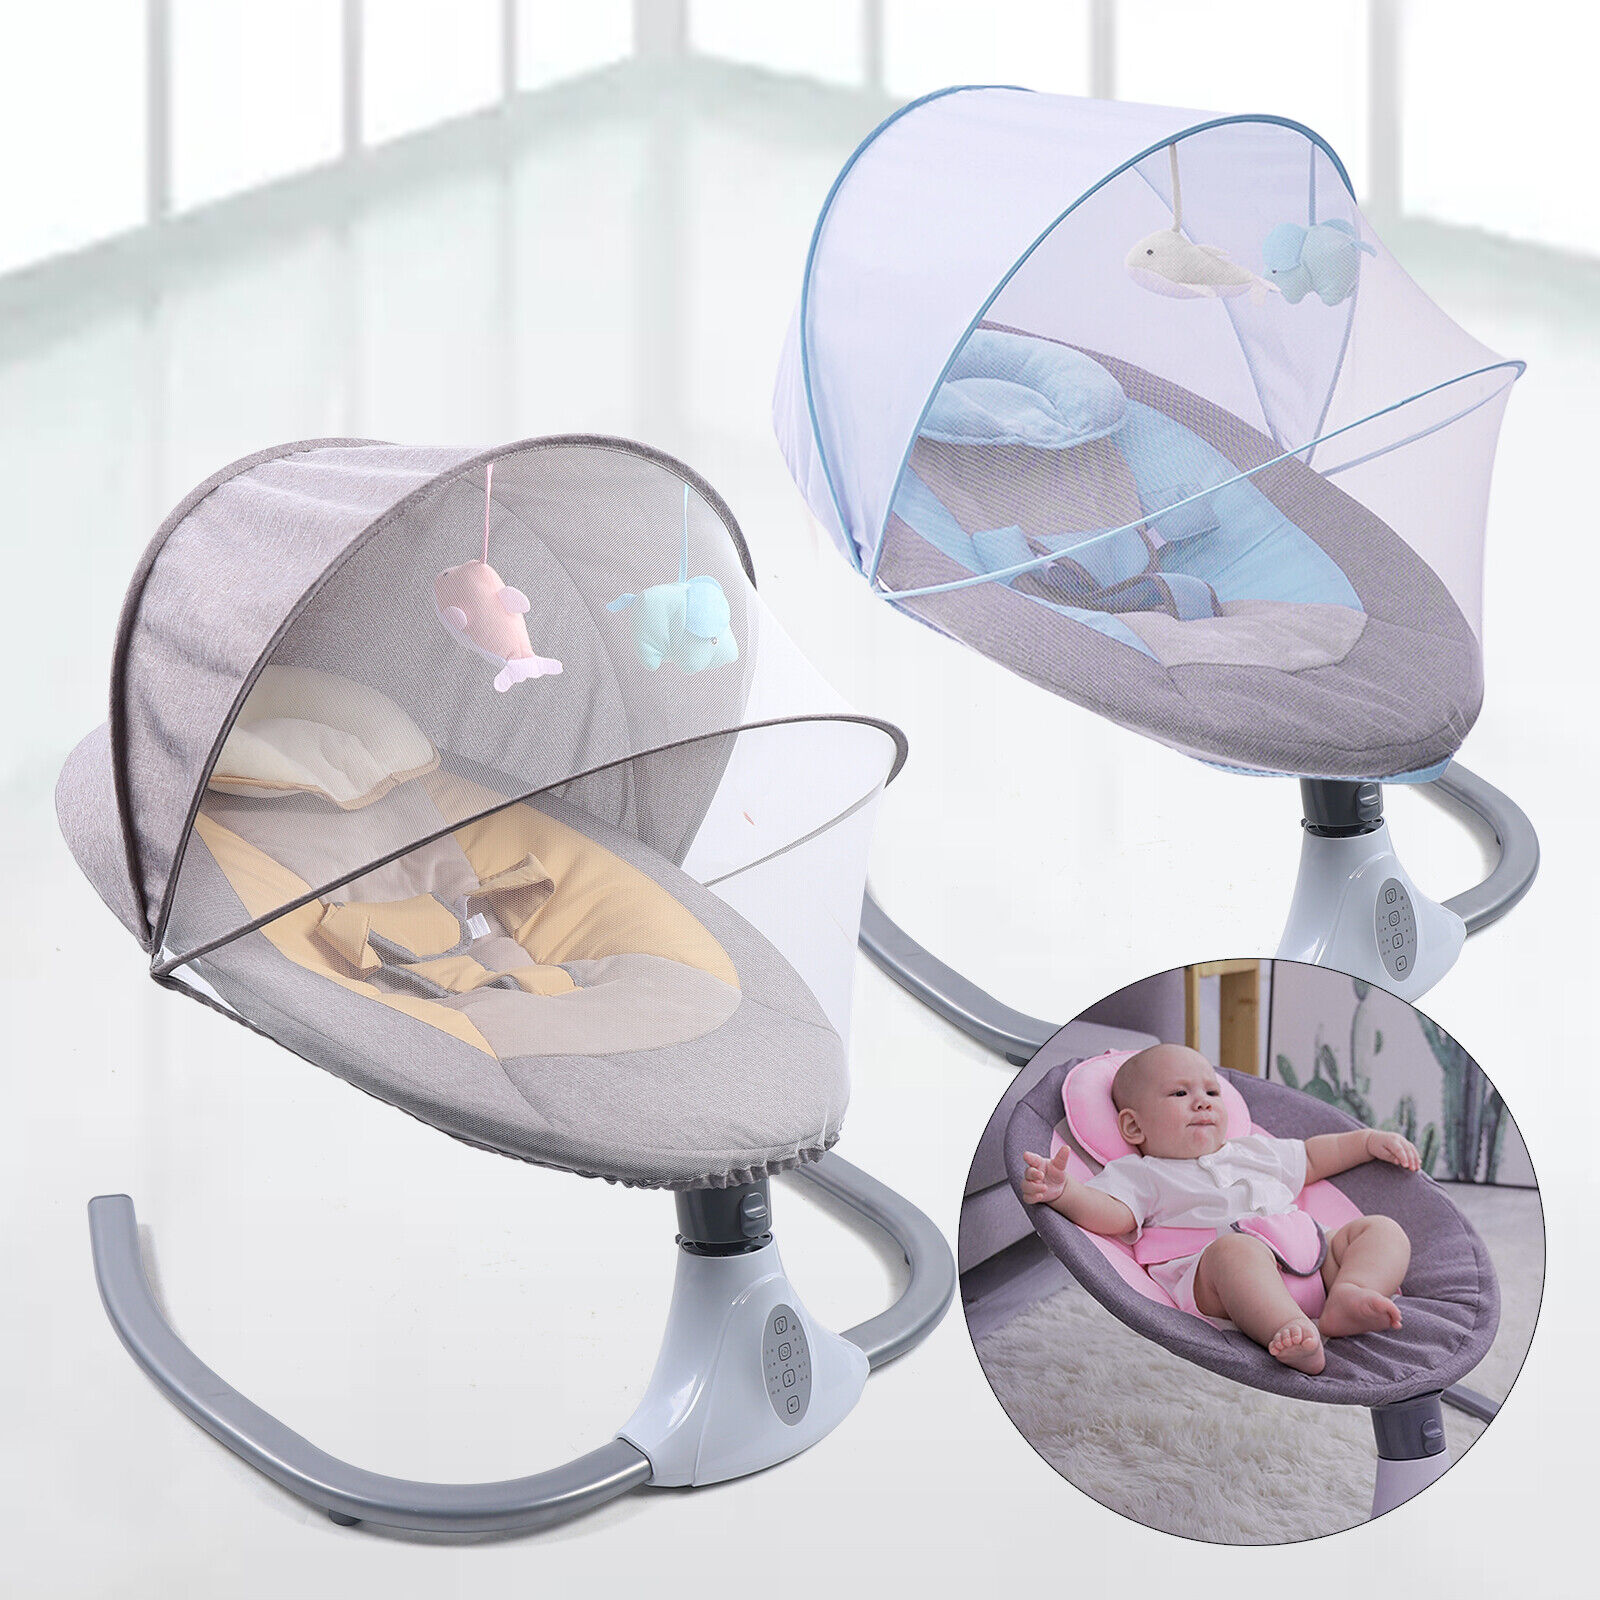 Electric Baby Swing Cradle Rocker Chair Bouncer Seat Infant Music Seat 3colors